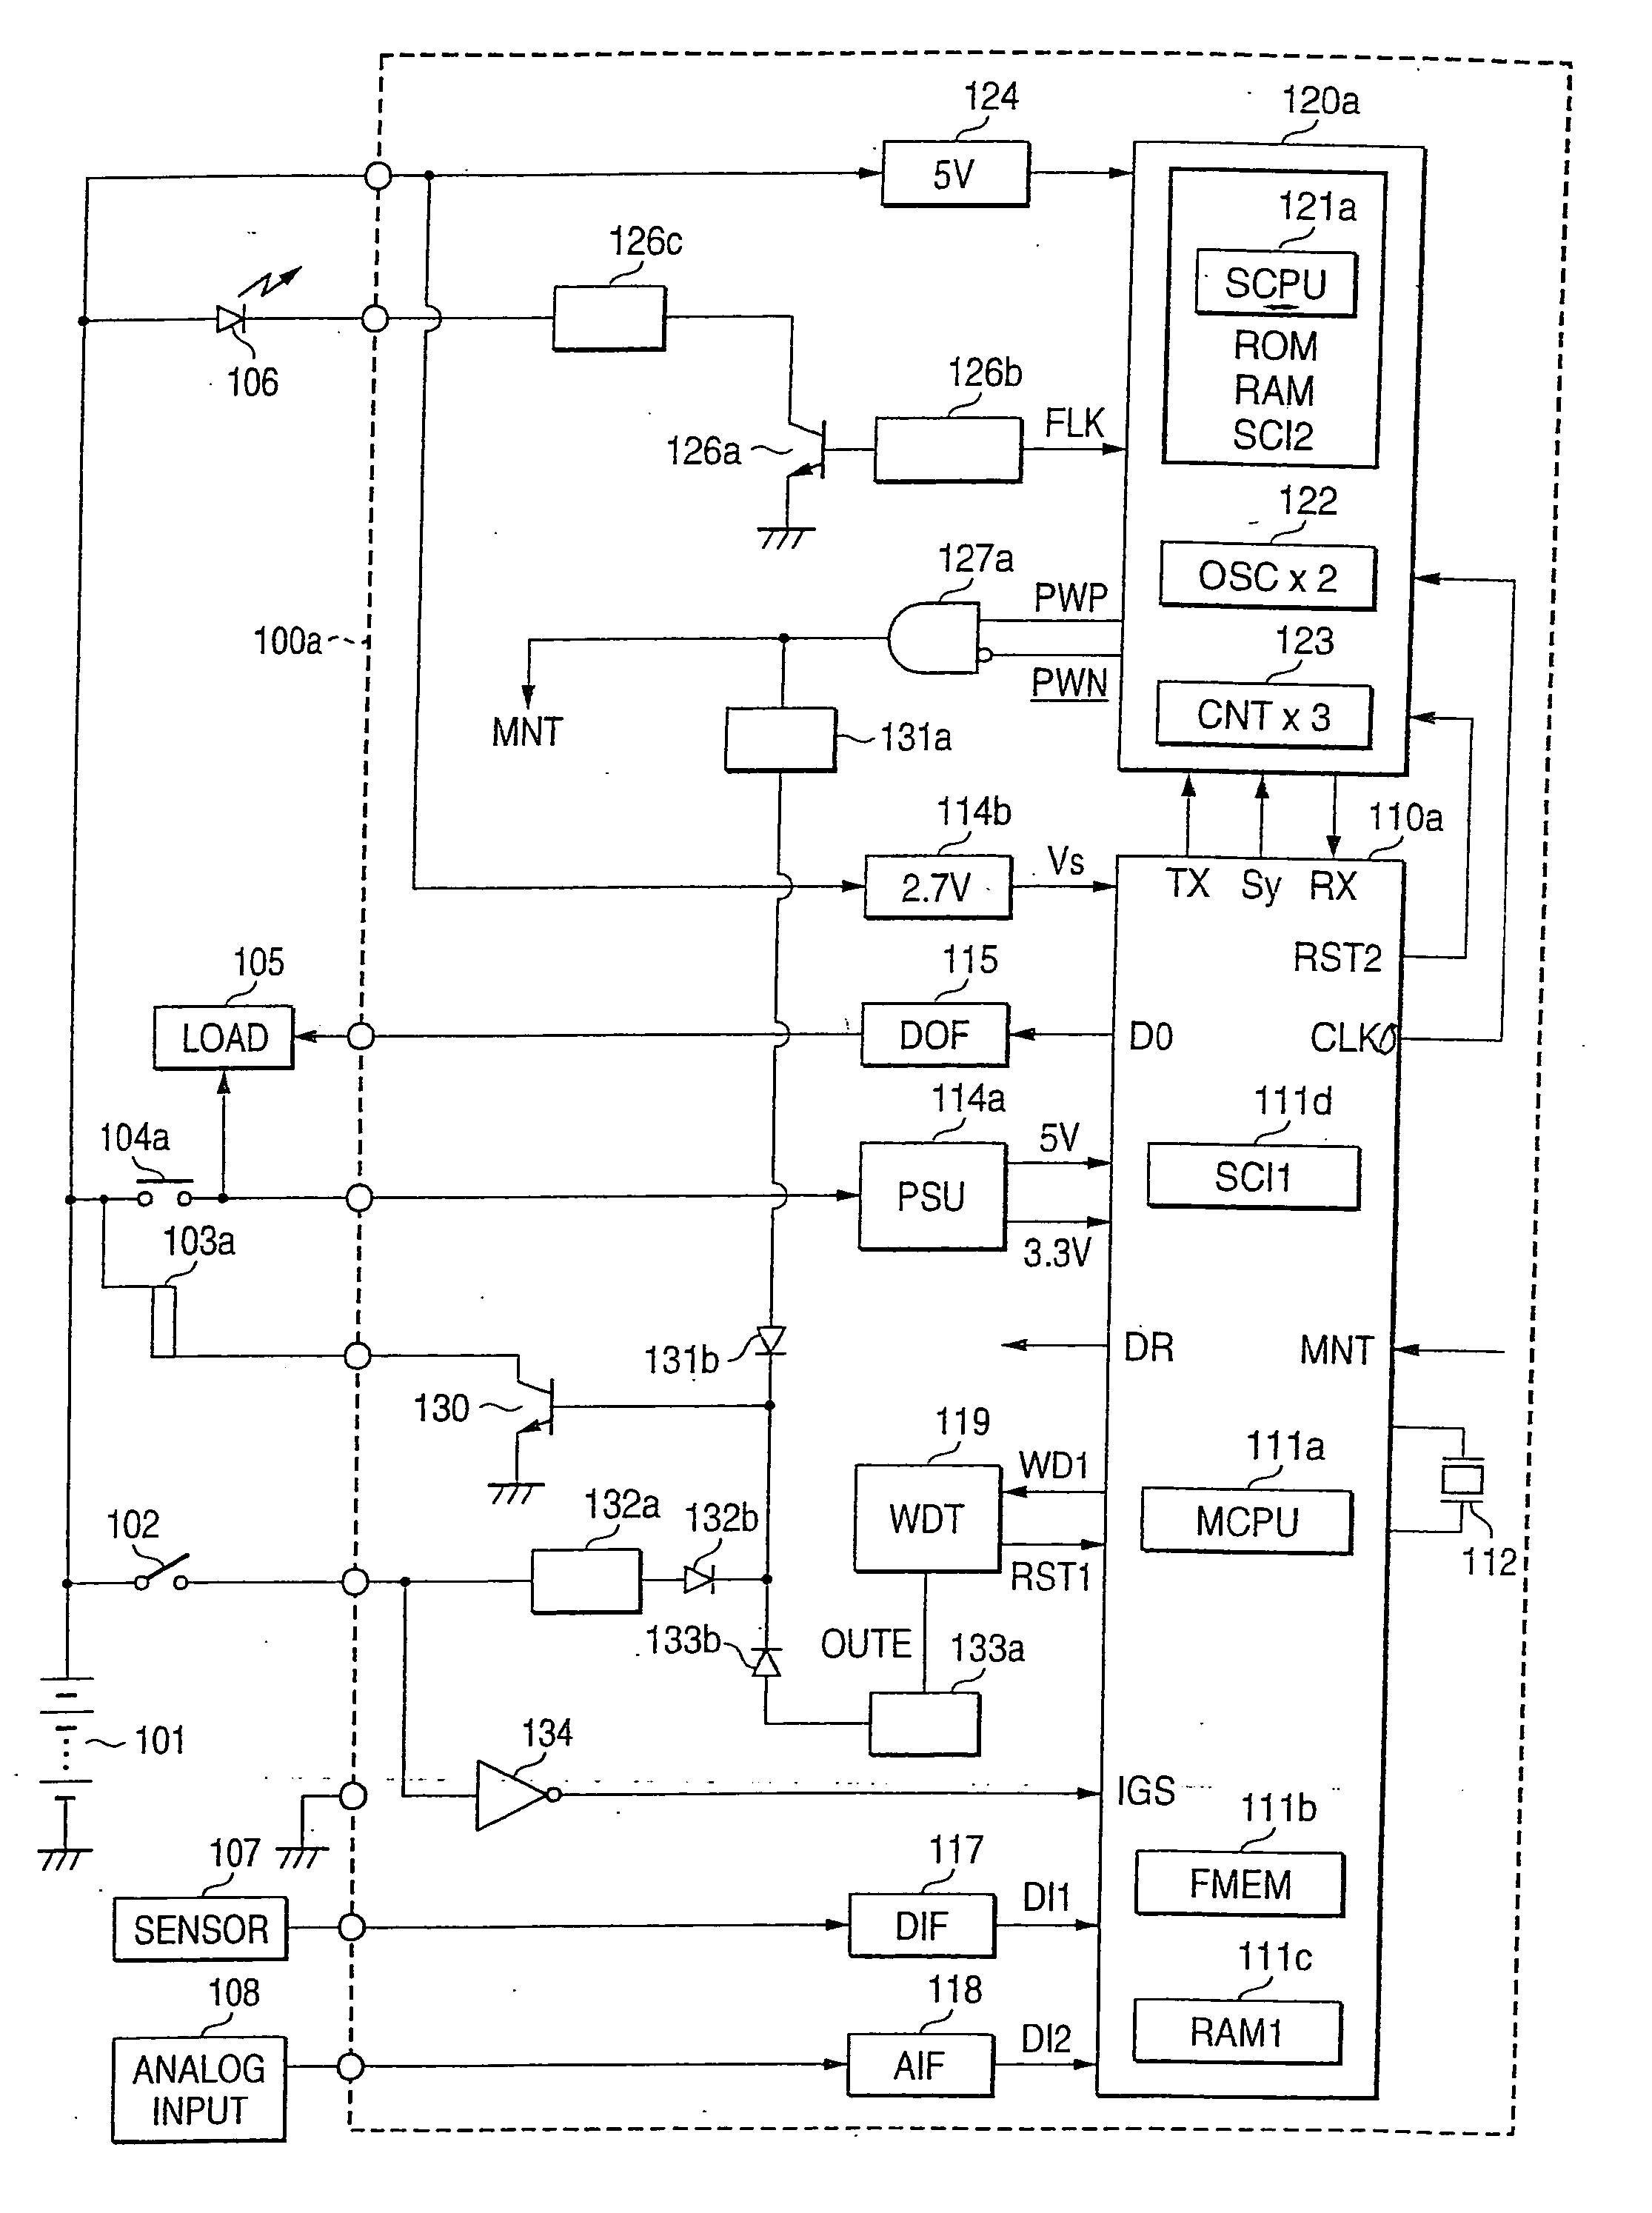 Car-mounted electronic control device